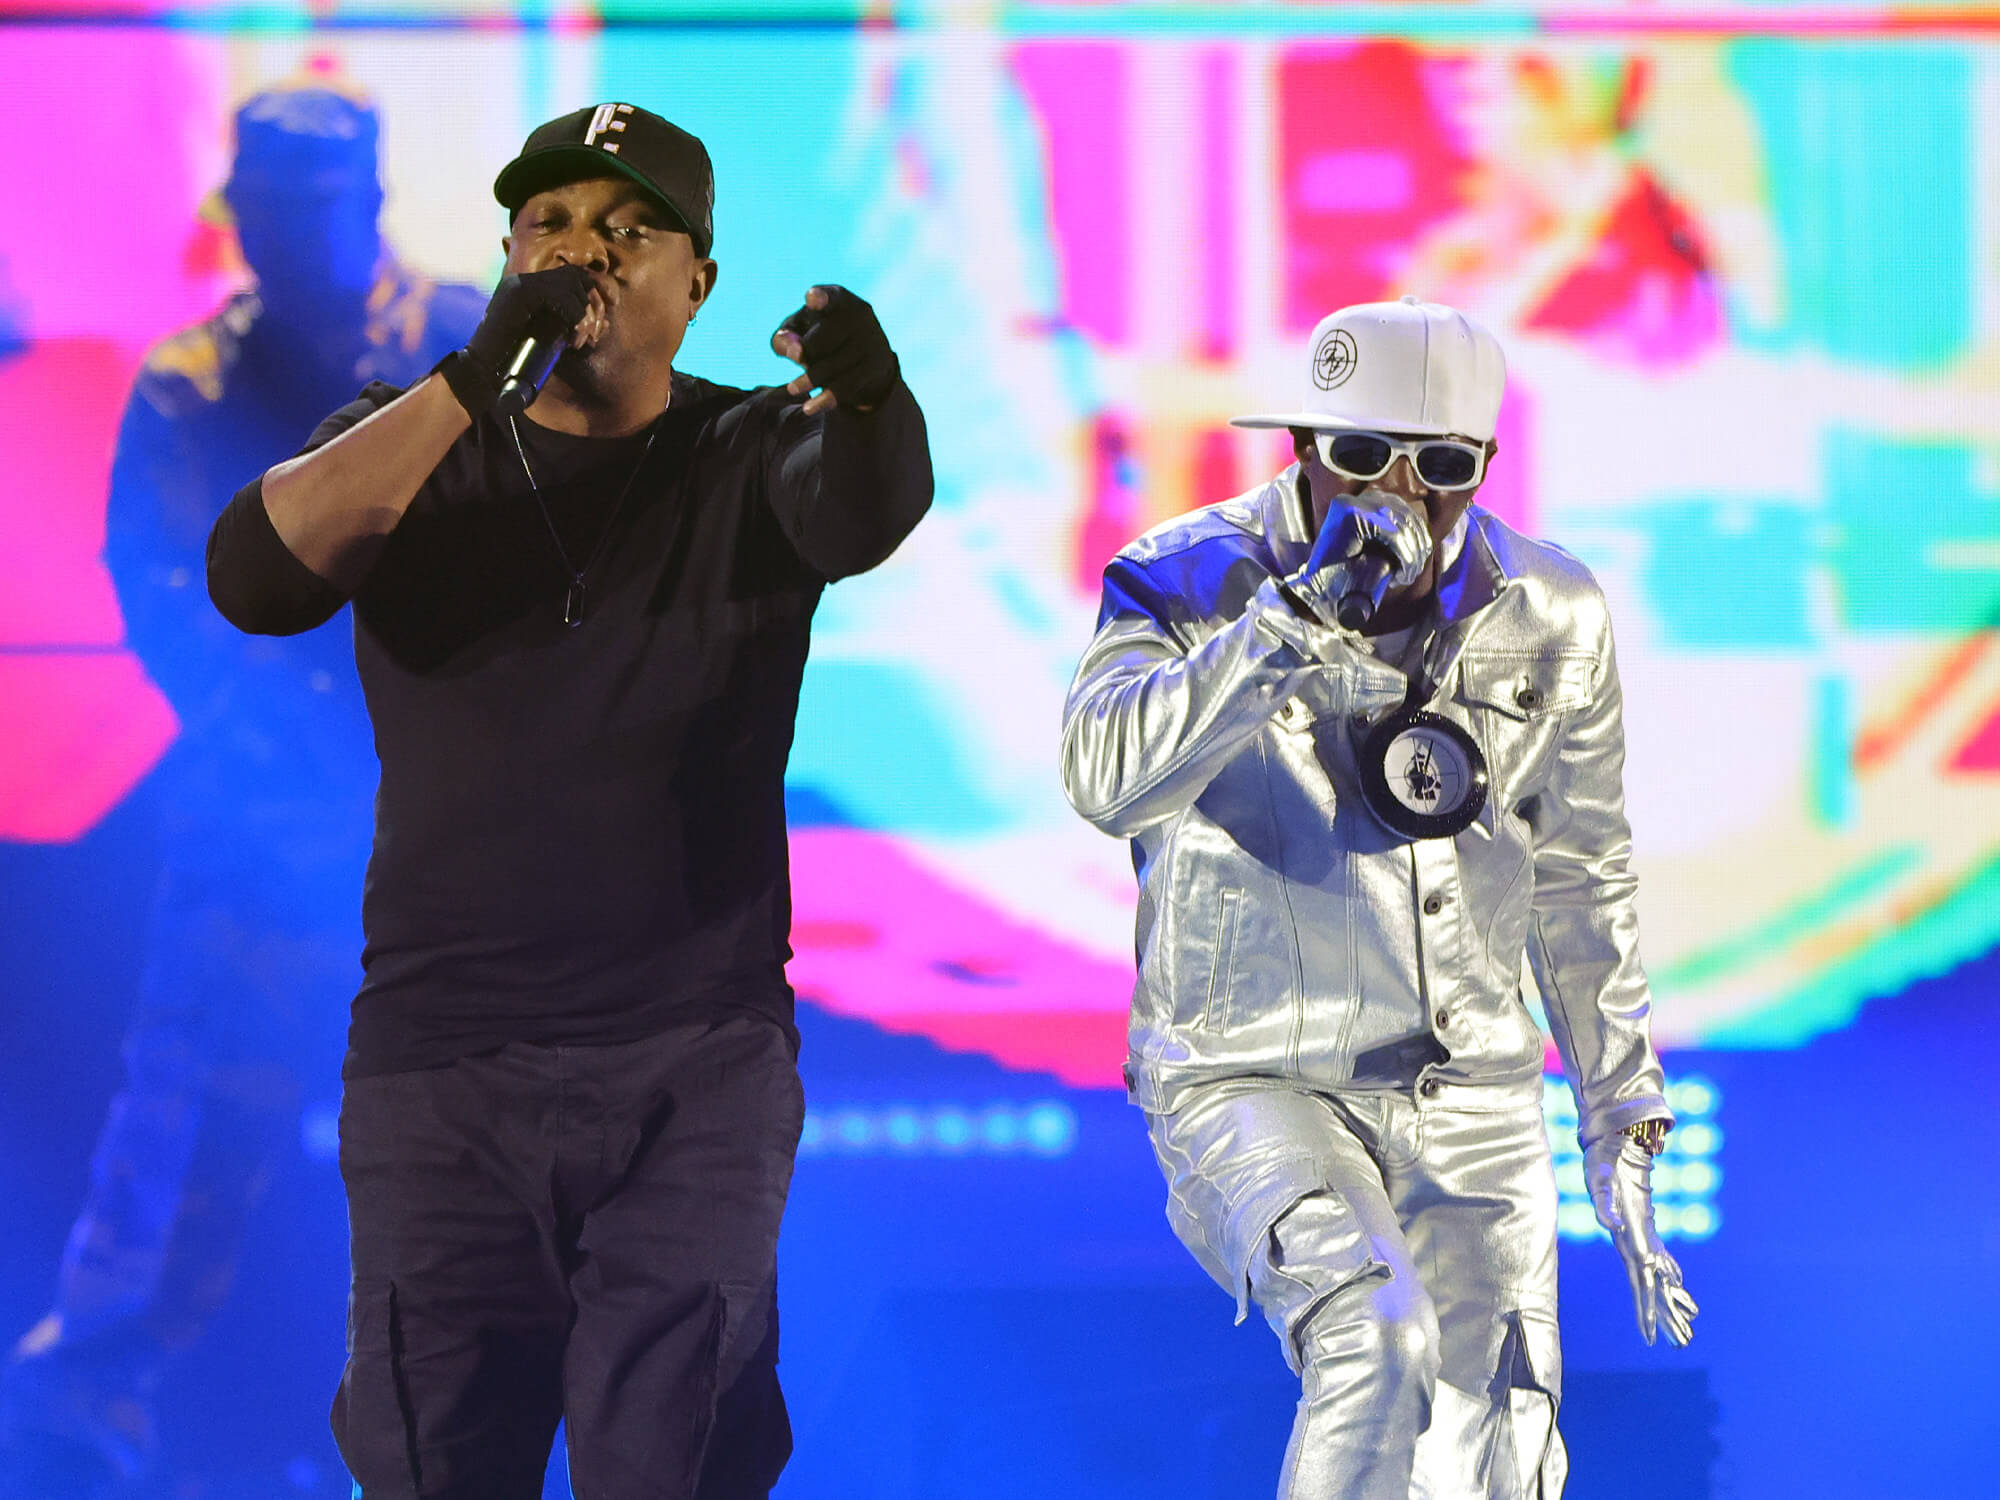 Chuck D and Flavour Flav on stage in 2023. Chuck D wears an all black outfit, whilst Flavour Flav is dressed in silver. They both hold microphones.